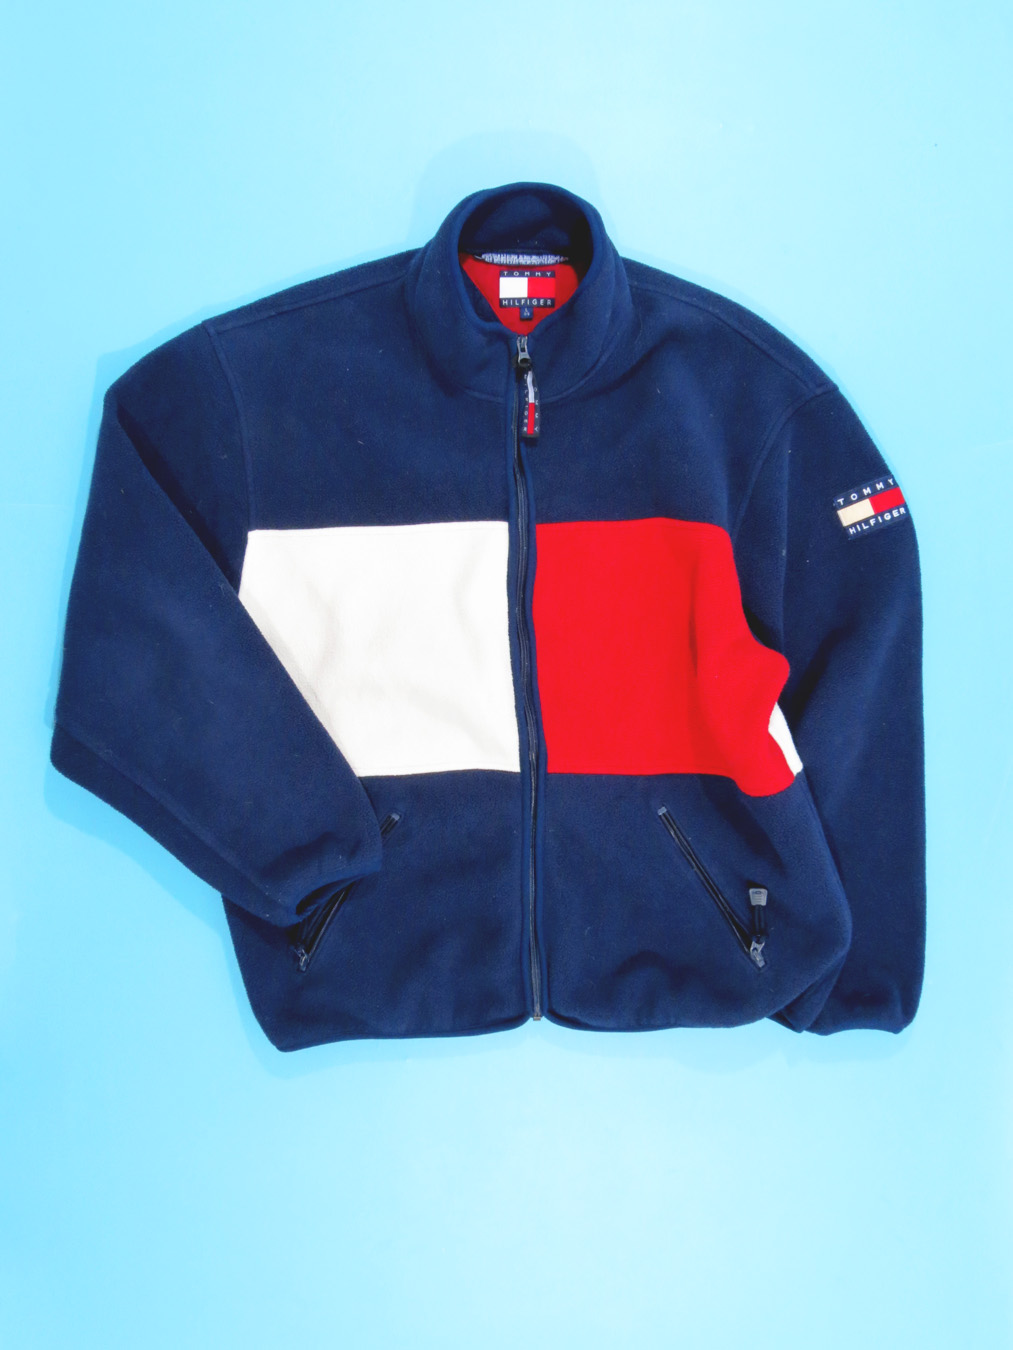 90s tommy hilfiger sweater